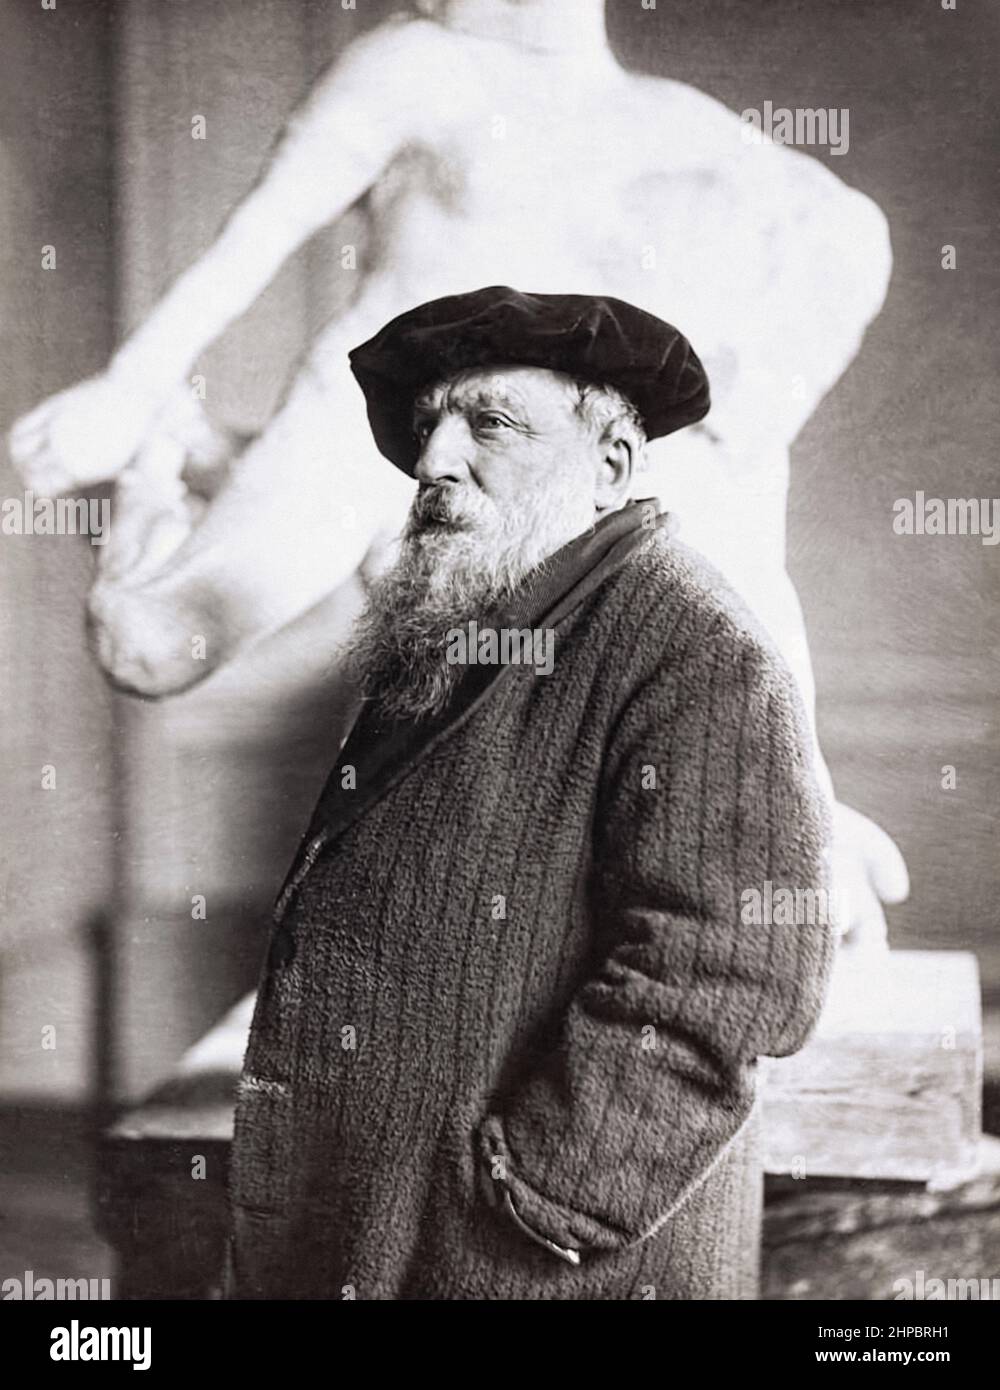 Auguste Rodin (1840-1917) French sculptor with his sculpture The Eternal Idol (1893) in the background. Stock Photo